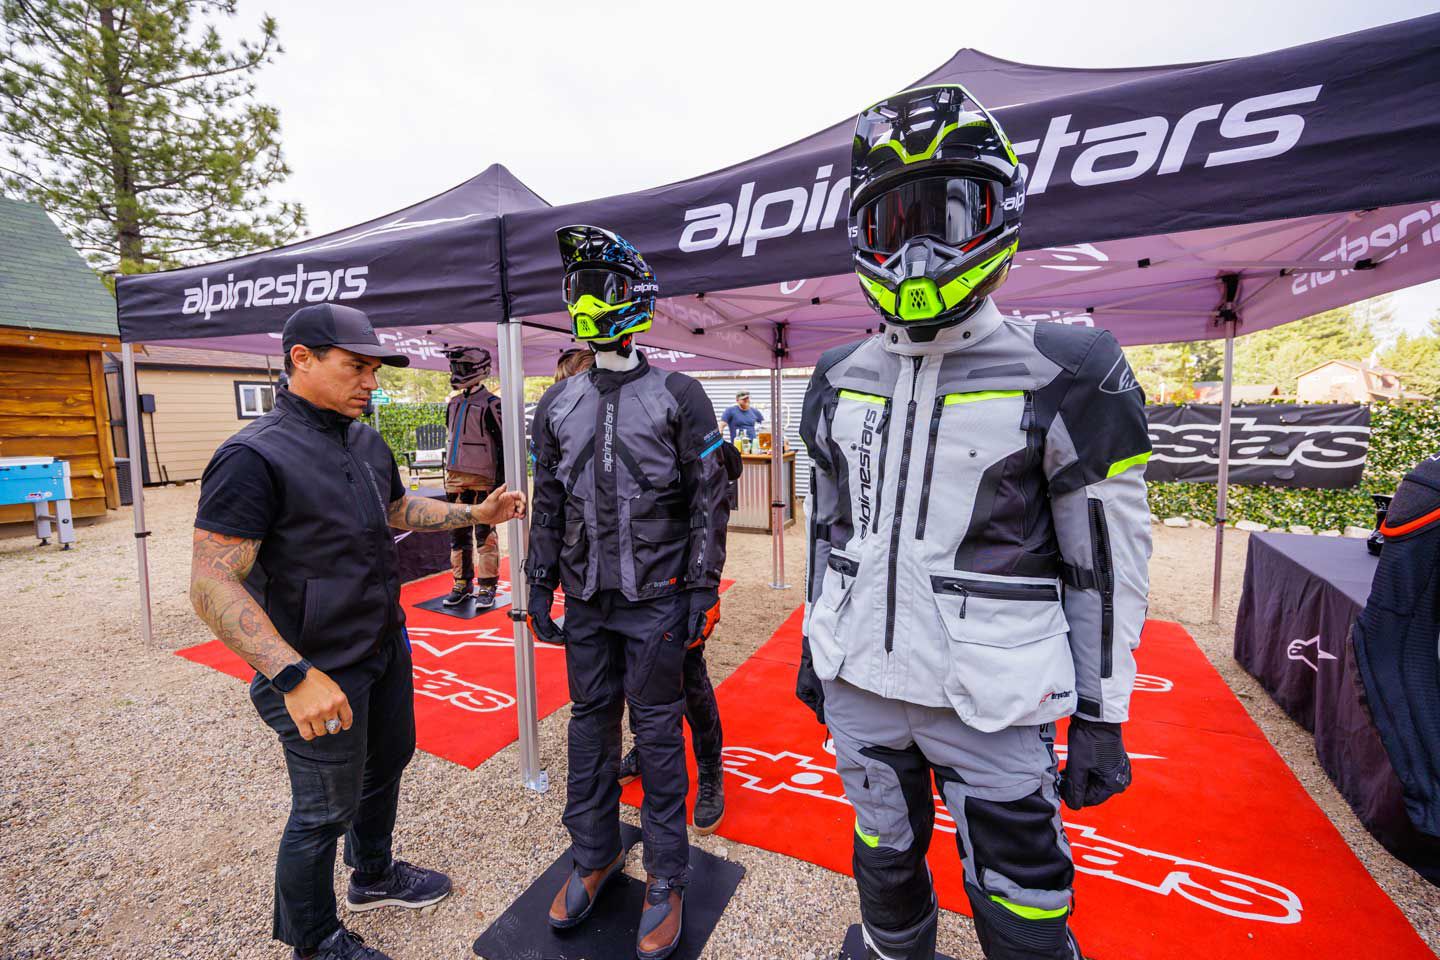 Alpinestars media lead Heath Cofran shows off Alpinestars new all-weather and touring-friendly AMT-10R pant and jacket.